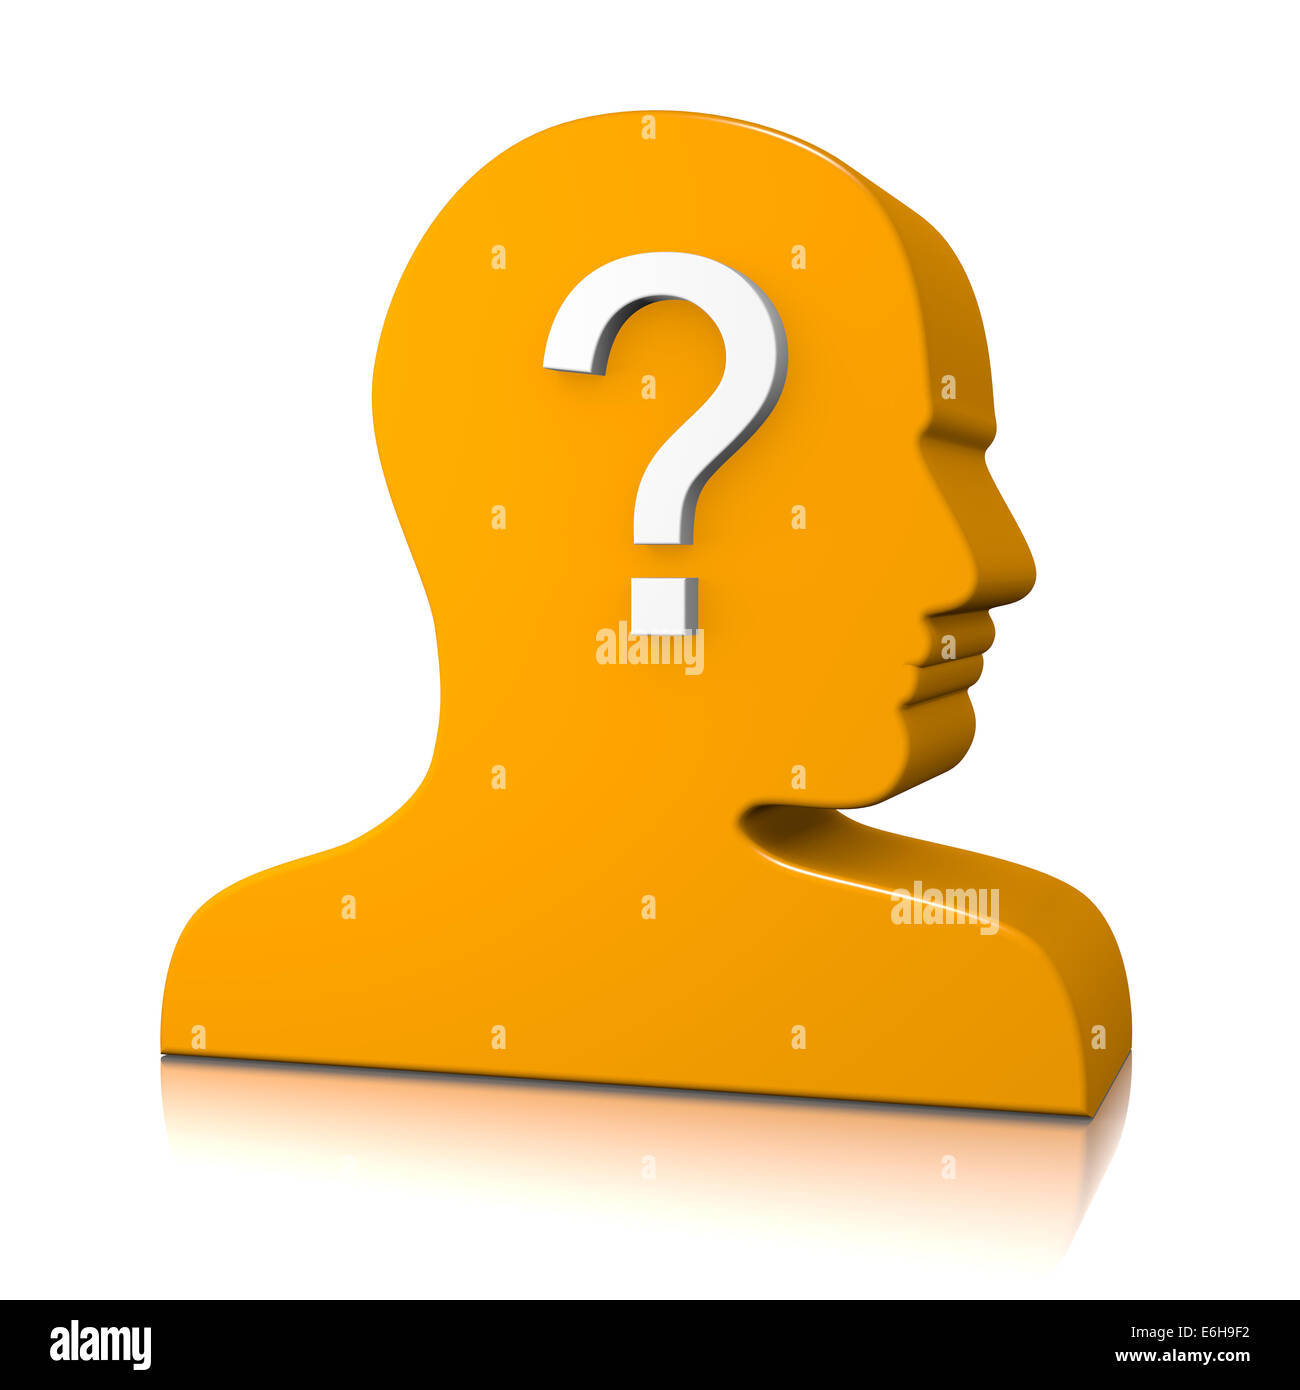 Orange Man Head Profile 3D Silhouette with Question Mark on White Background Identity Concept Stock Photo